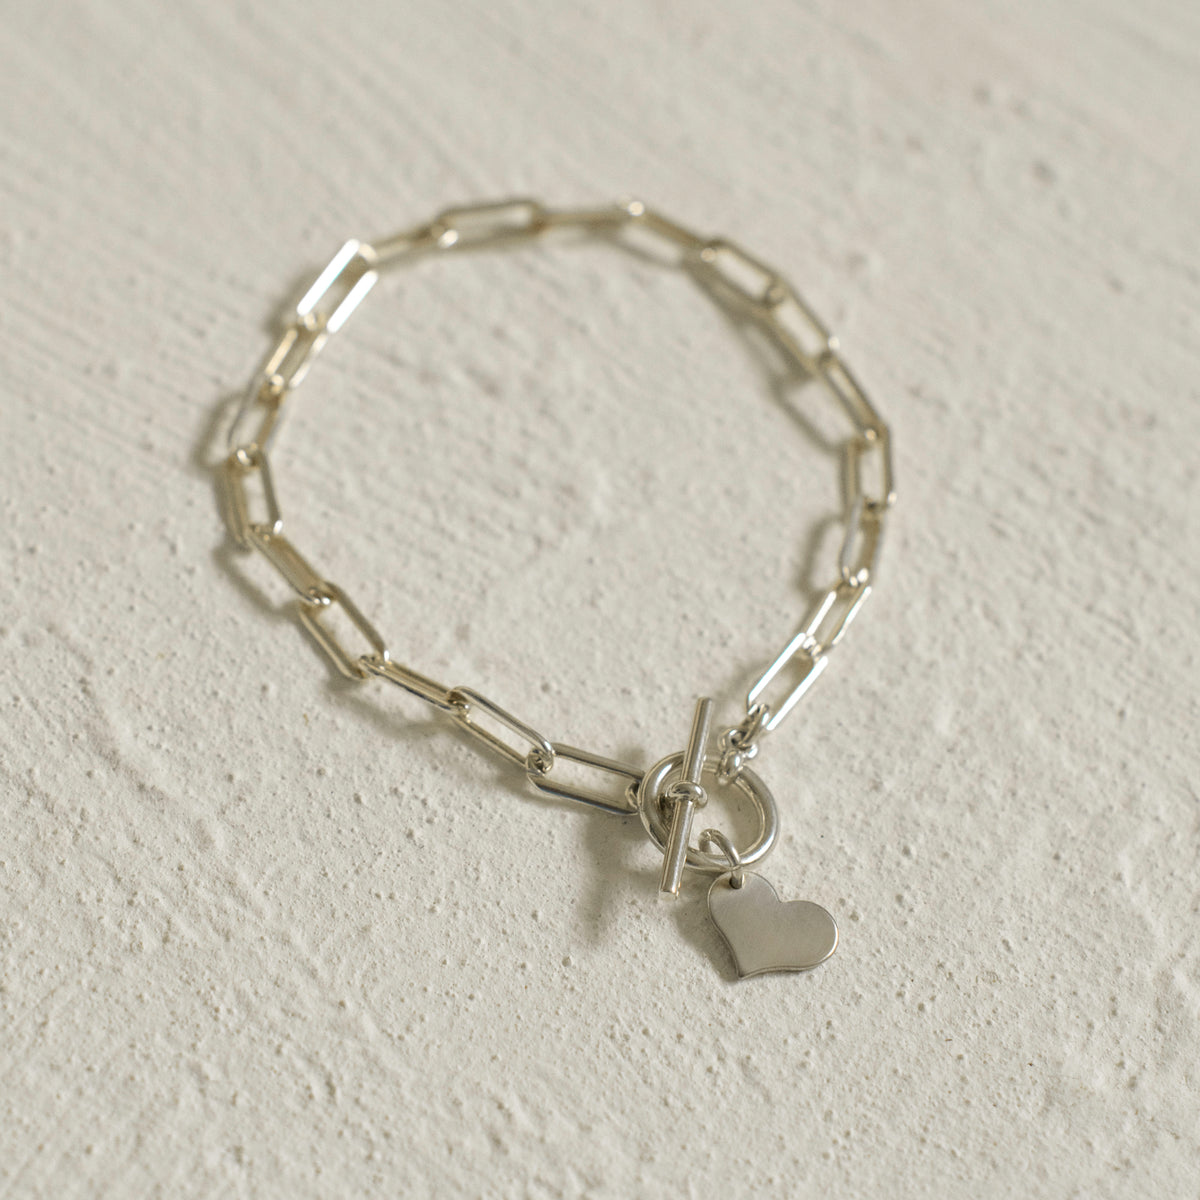 925 Sterling Silver Tiny Heart Charm on a Bold Paper Clip Bracelet with Toggle Closure